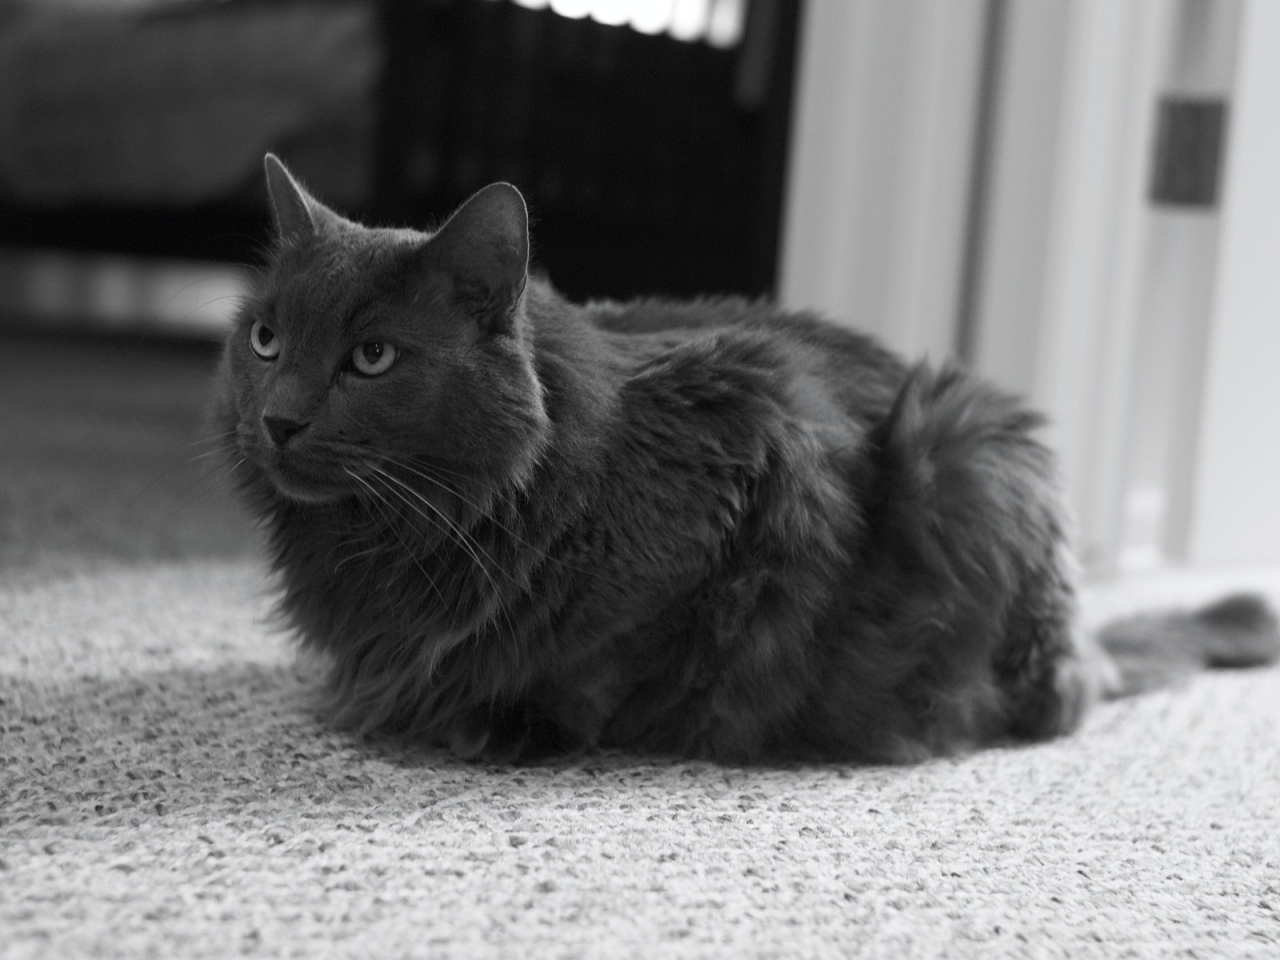 Monochrome Nebelung Cat for 1280 x 960 resolution